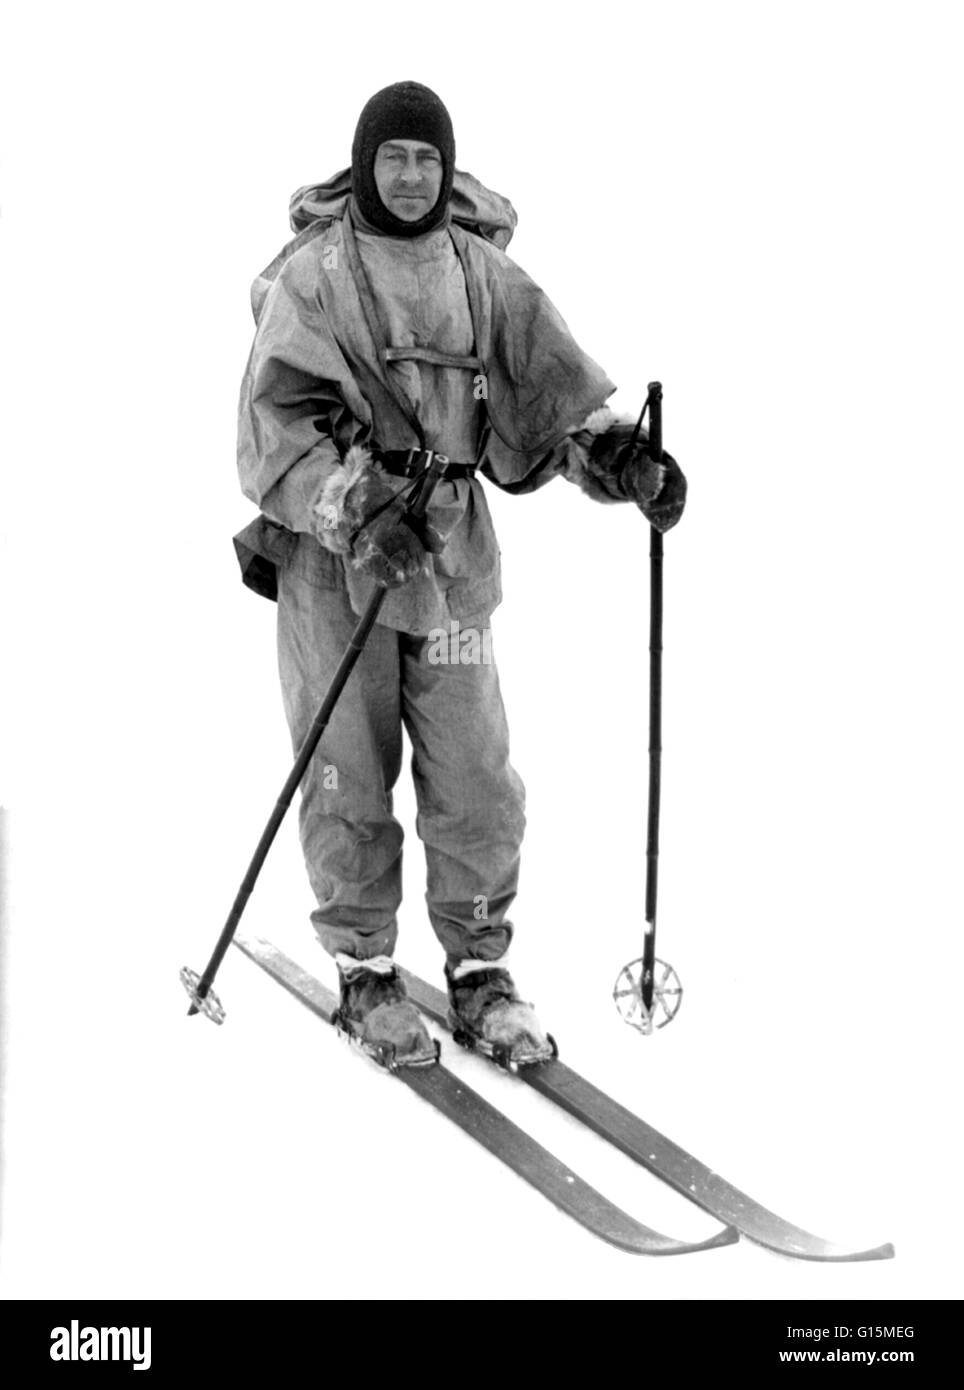 Robert Falcon Scott (June 6, 1868 - March 29, 1912) was a Royal Navy officer and explorer who led two expeditions to the Antarctic regions: the Discovery Expedition, 1901-04, and the ill-fated Terra Nova Expedition, 1910-13. During this second venture, Sc Stock Photo